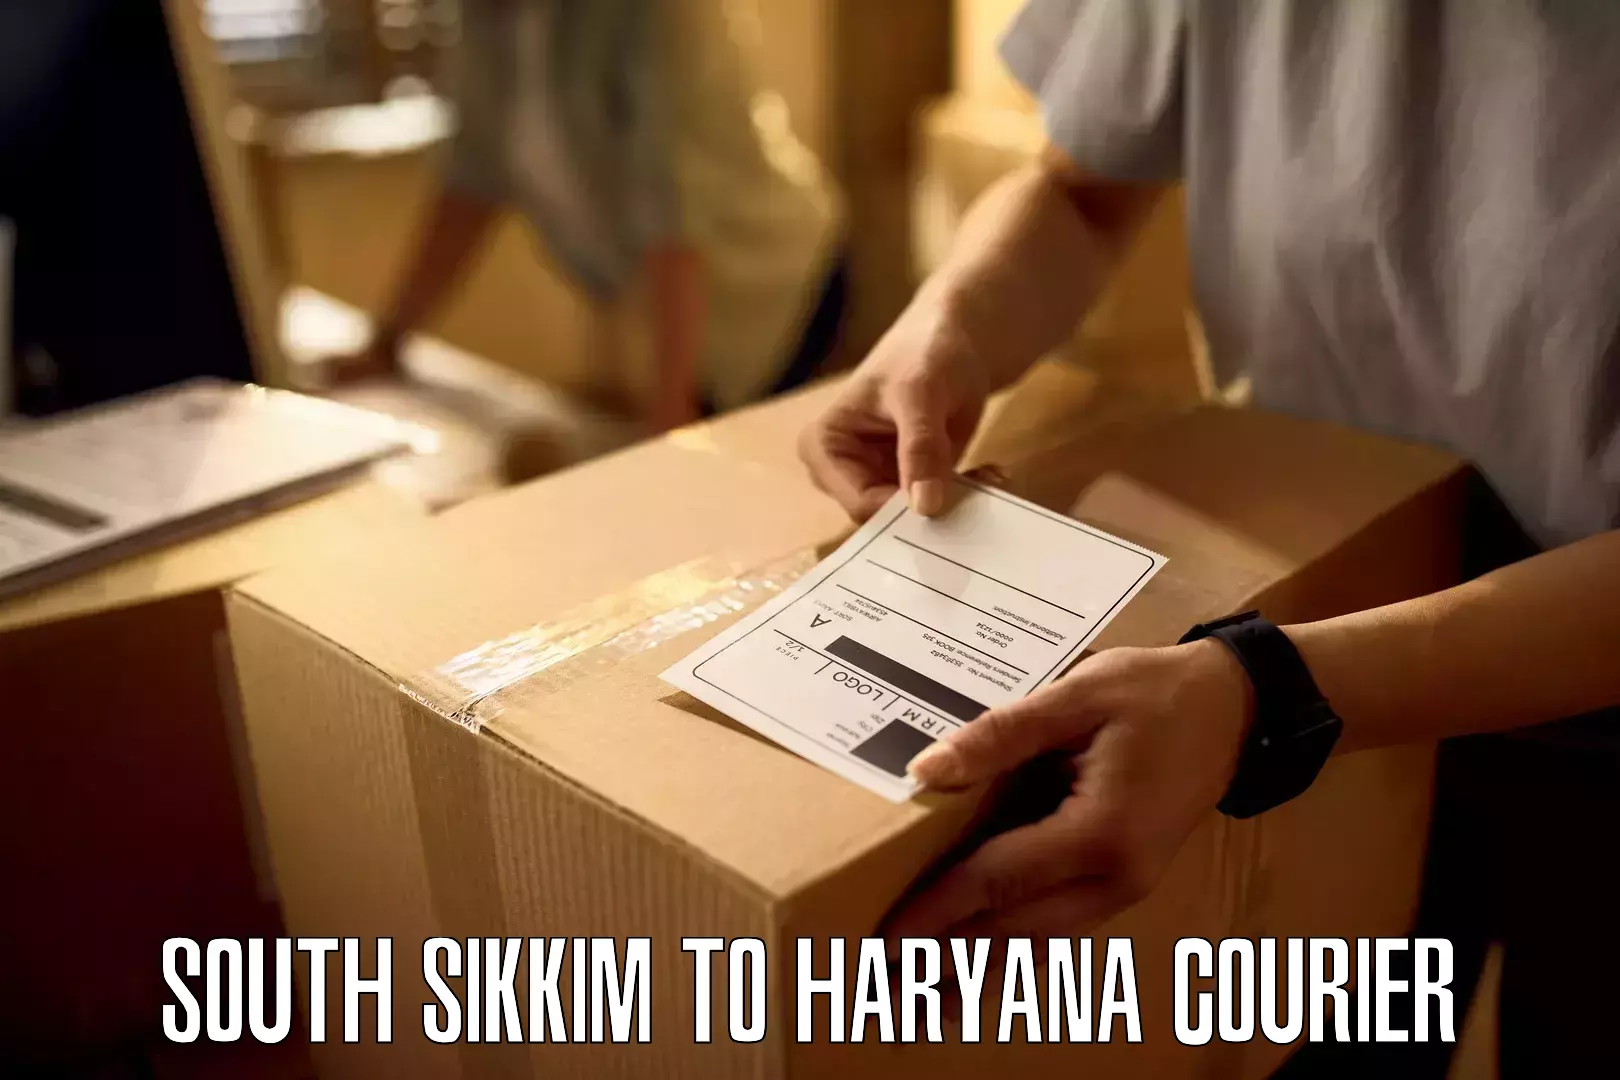 Next-day delivery options in South Sikkim to Barwala